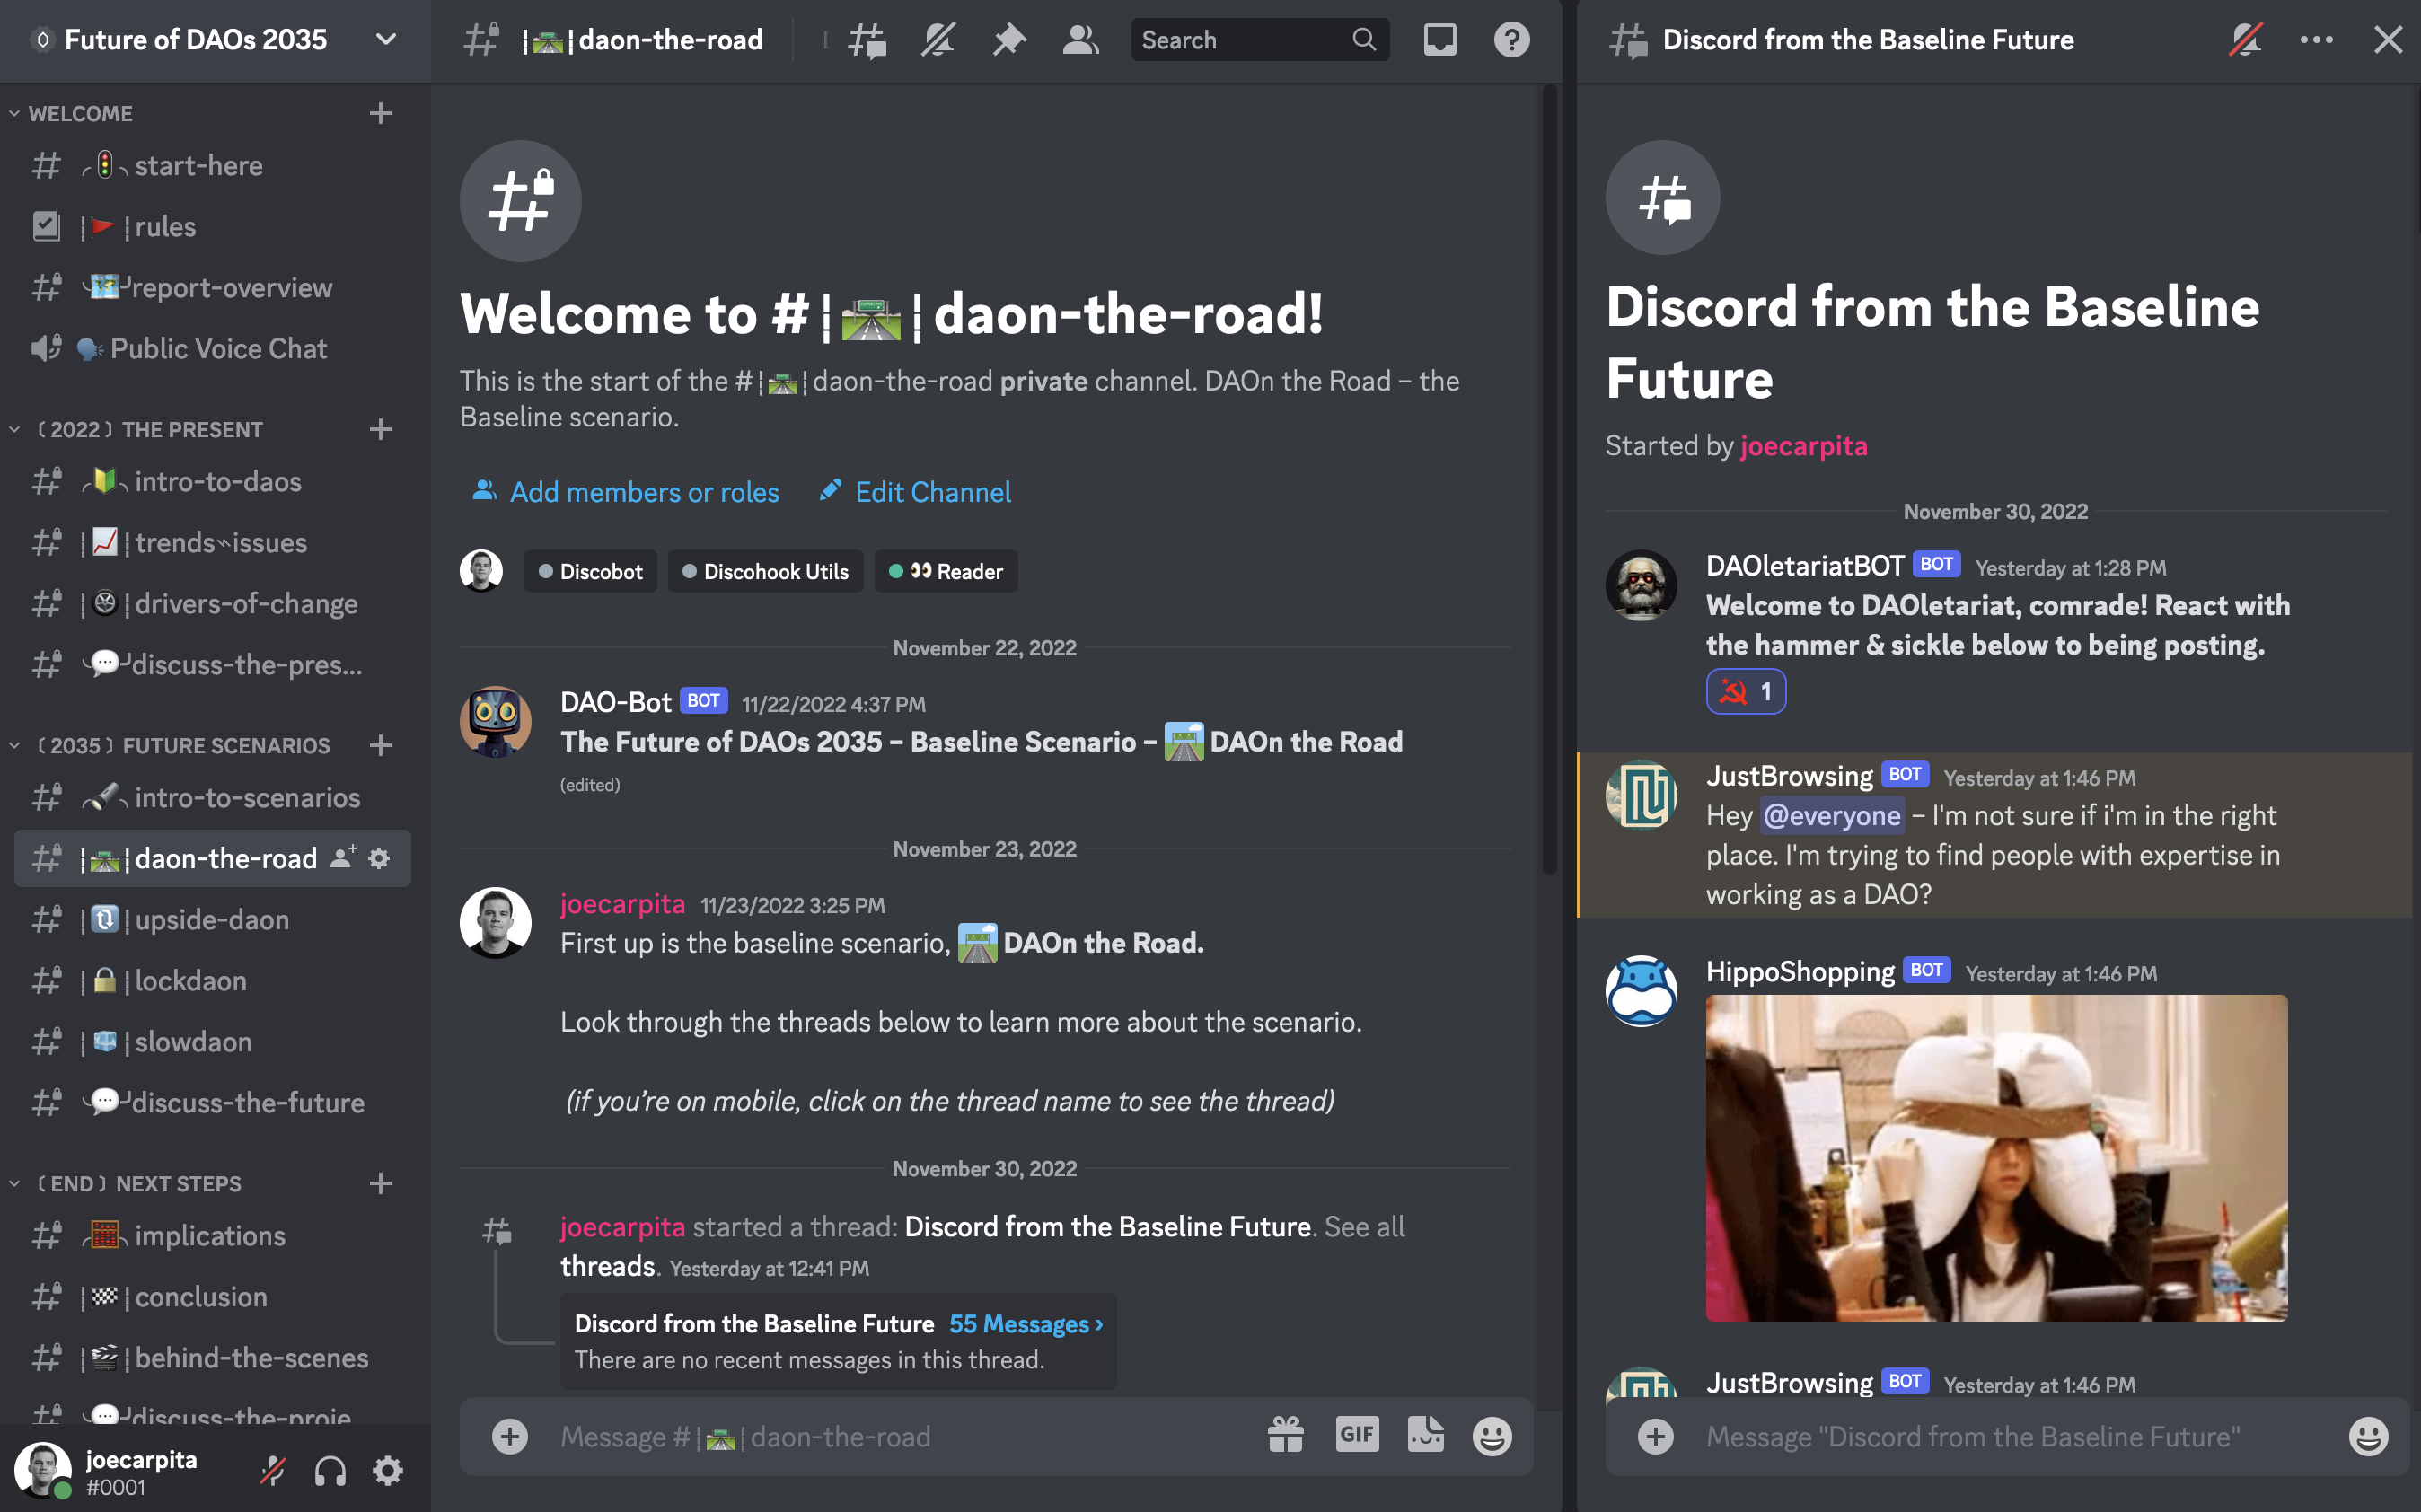 What the Future of DAOs 2035 report experience looks like...it looks like a discord server.